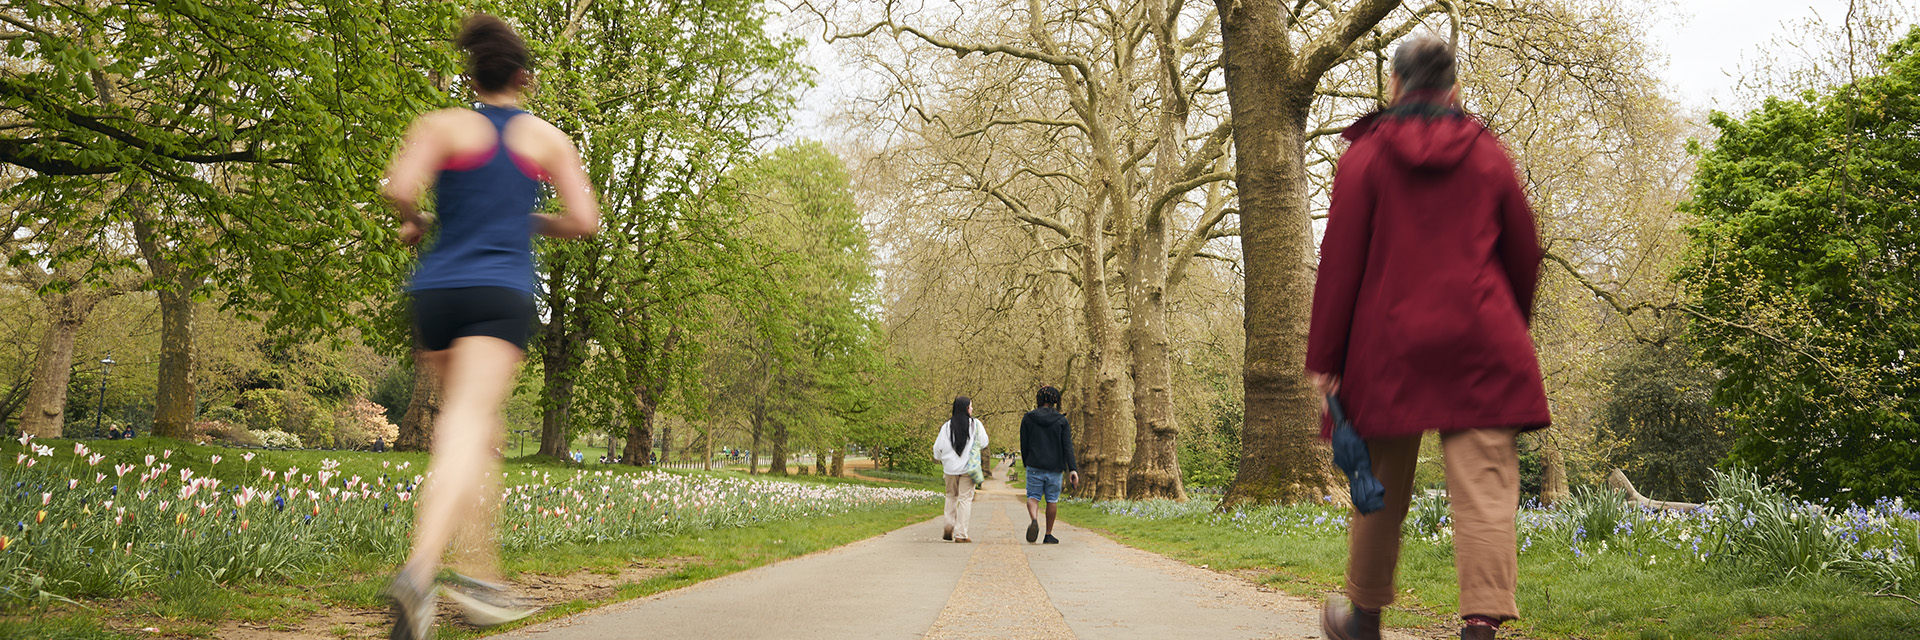 View of path in Hyde Park surrounded by trees and flowers. Runners and passers by can be seen making their way through the park.